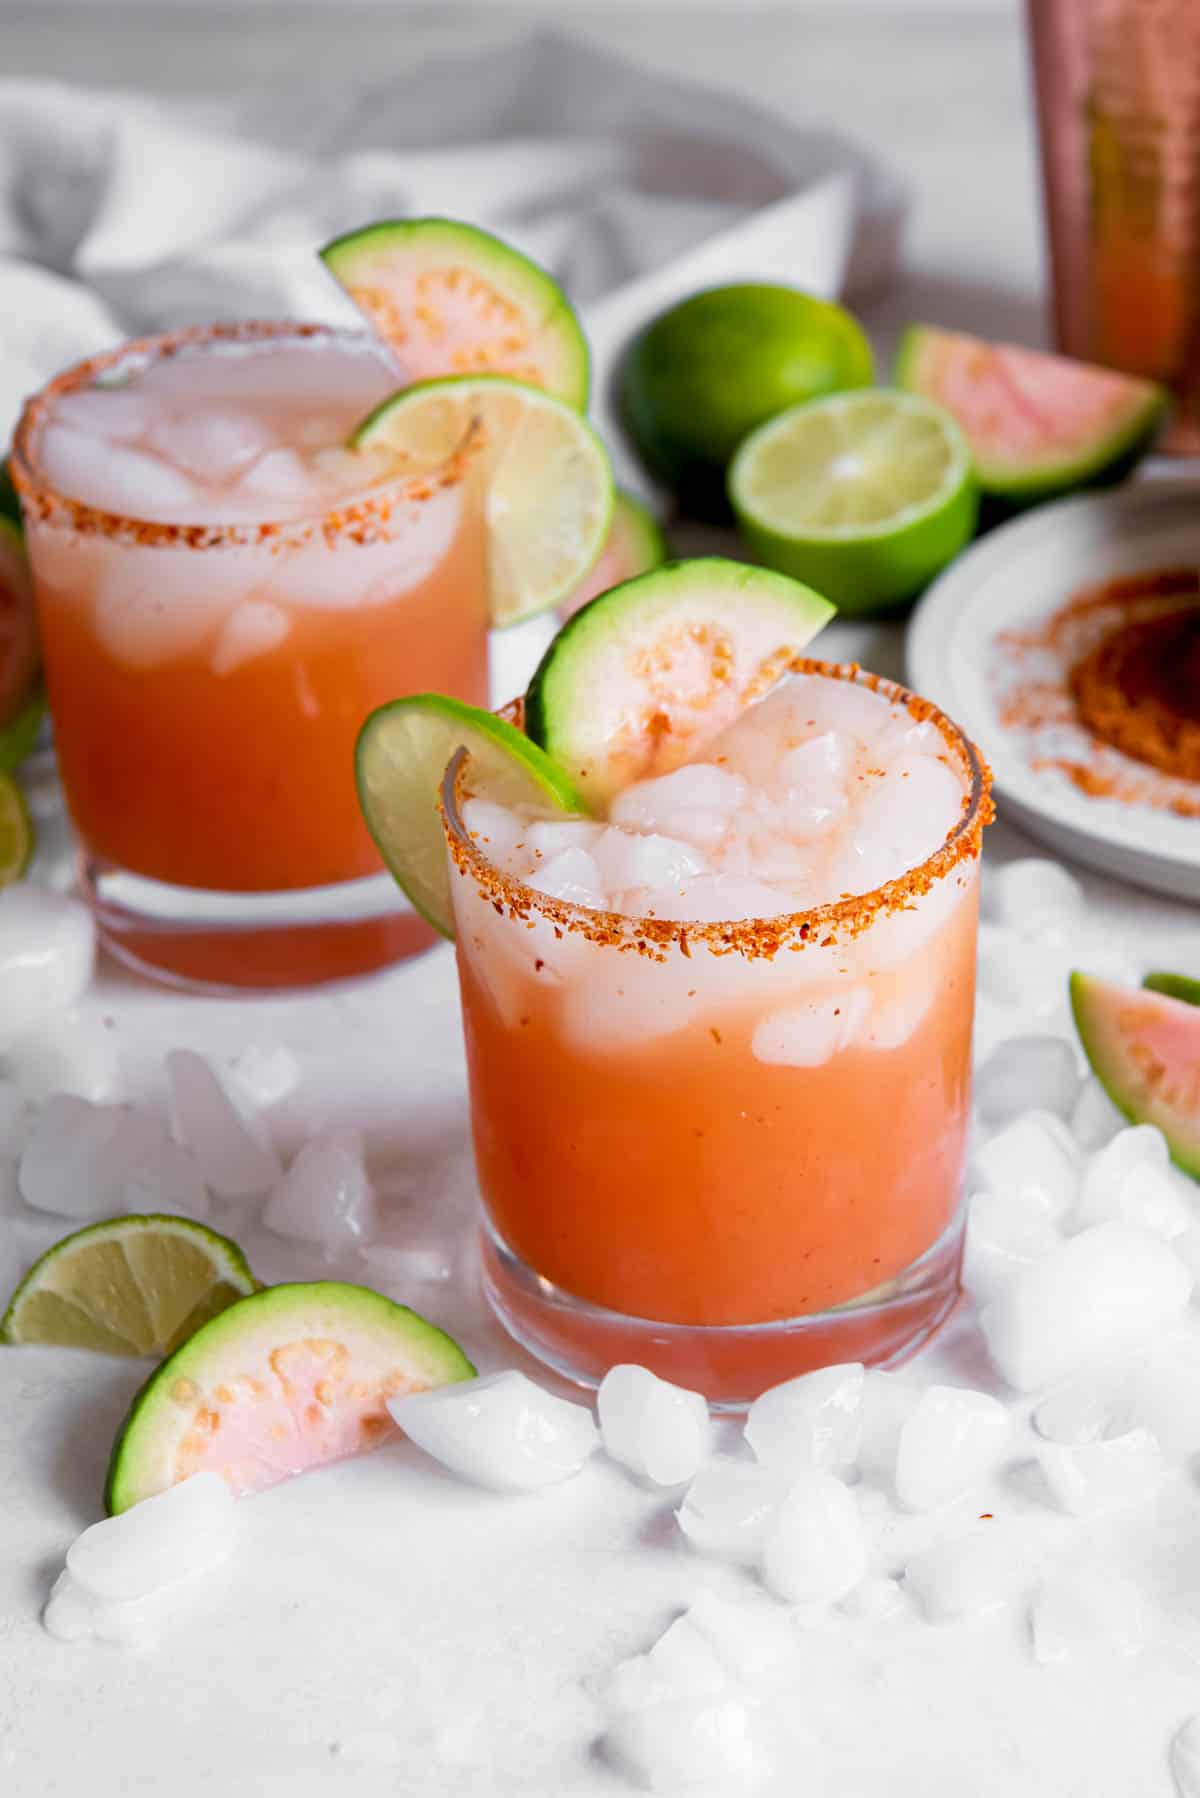 Margaritas with ice and guava as garnish and styling.